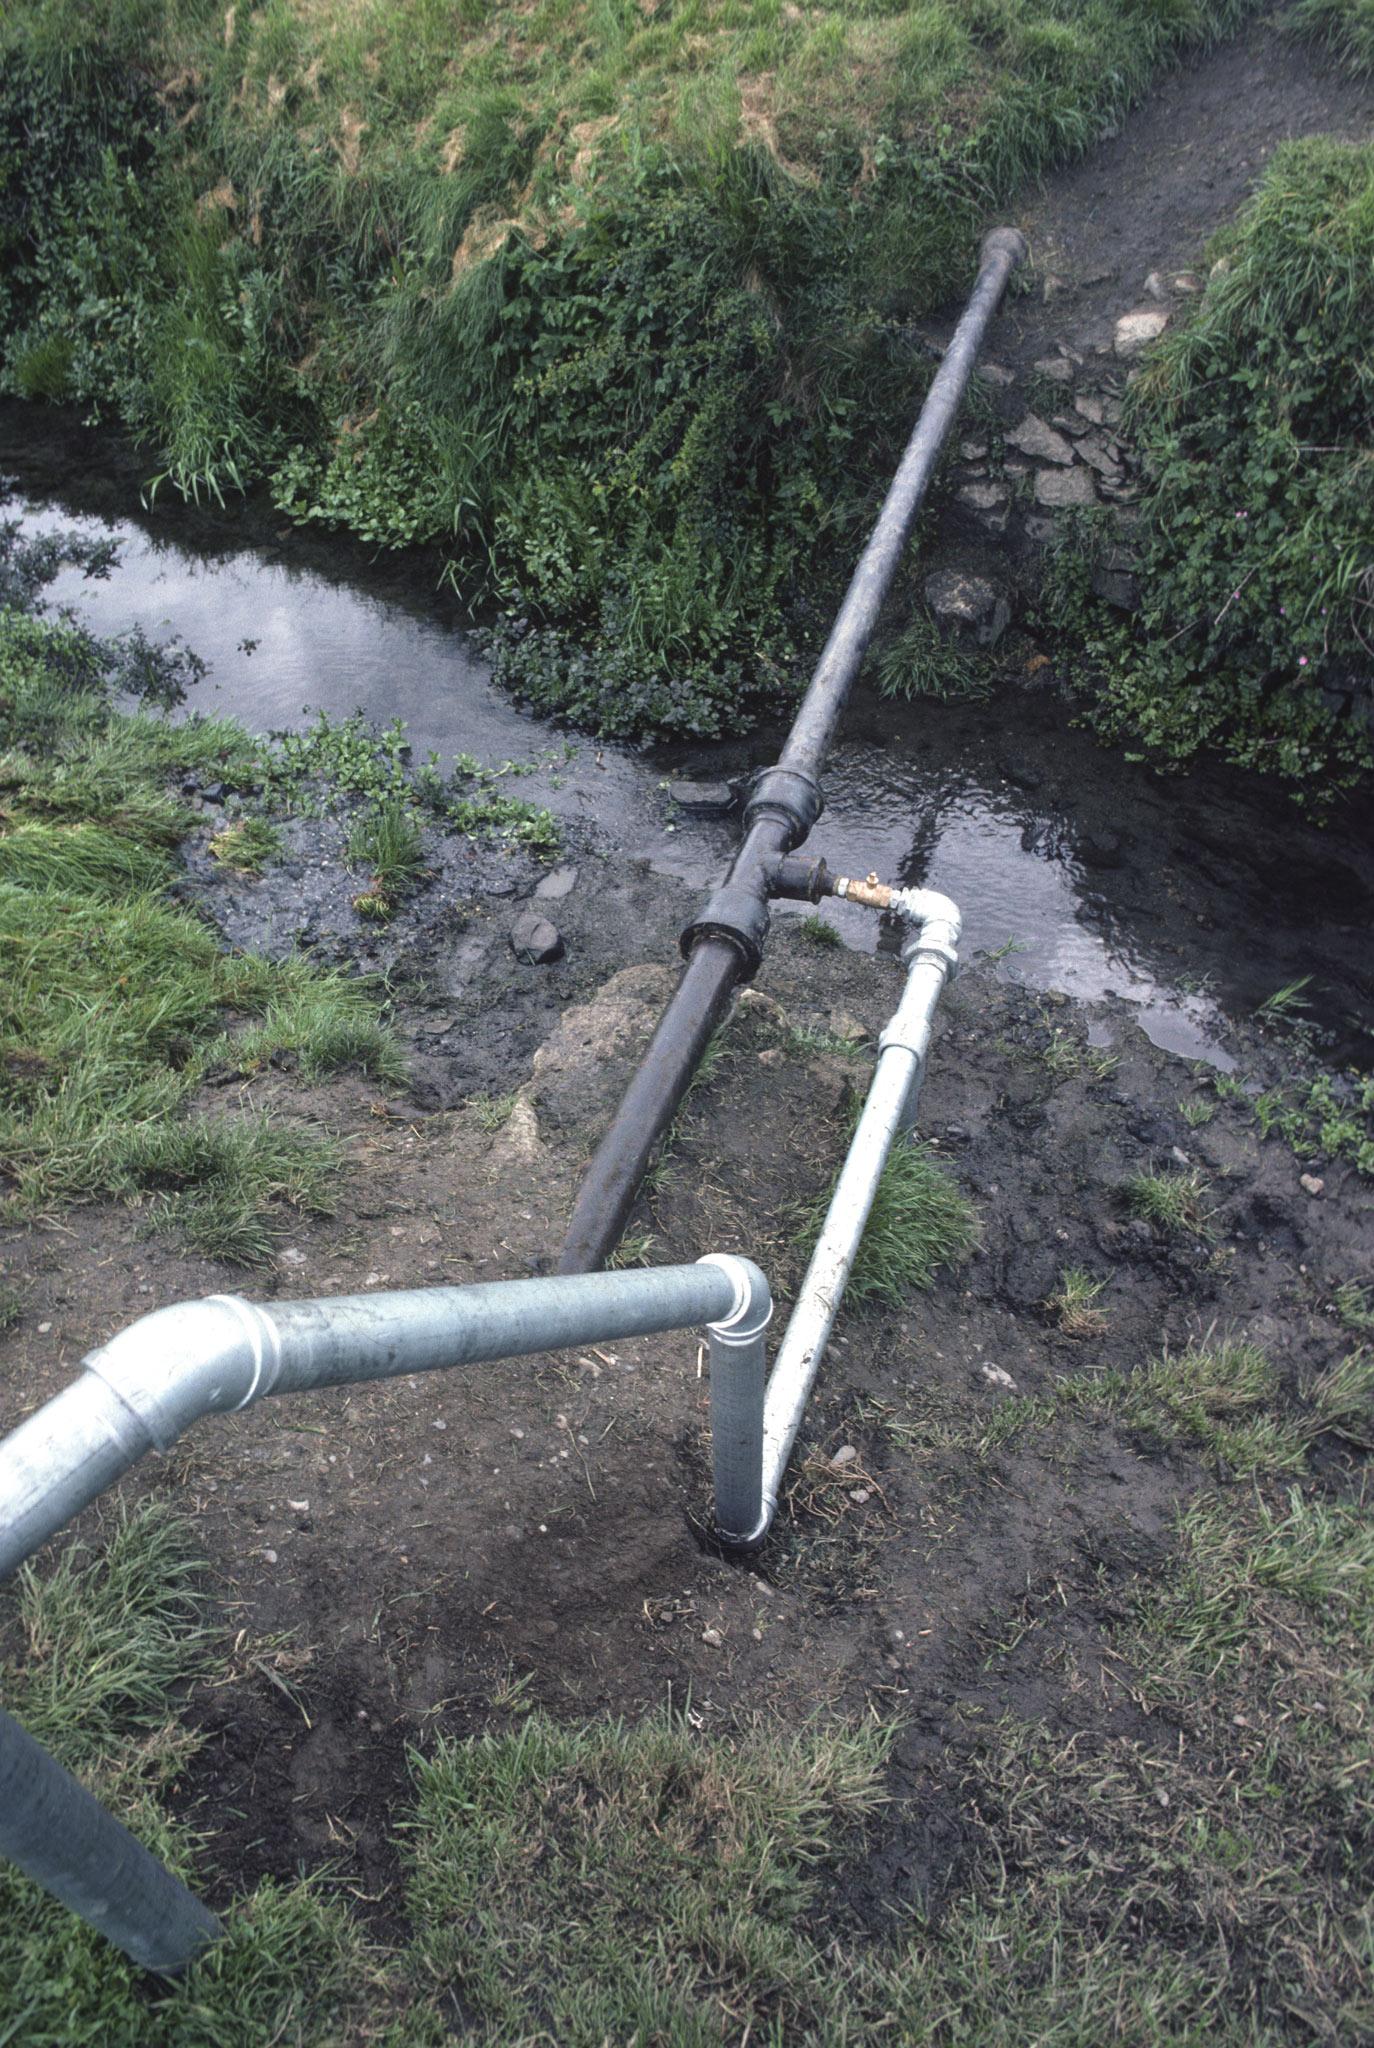 galvanized steel pipes flowing downhill and tying into larger pipes in a muddy ditch